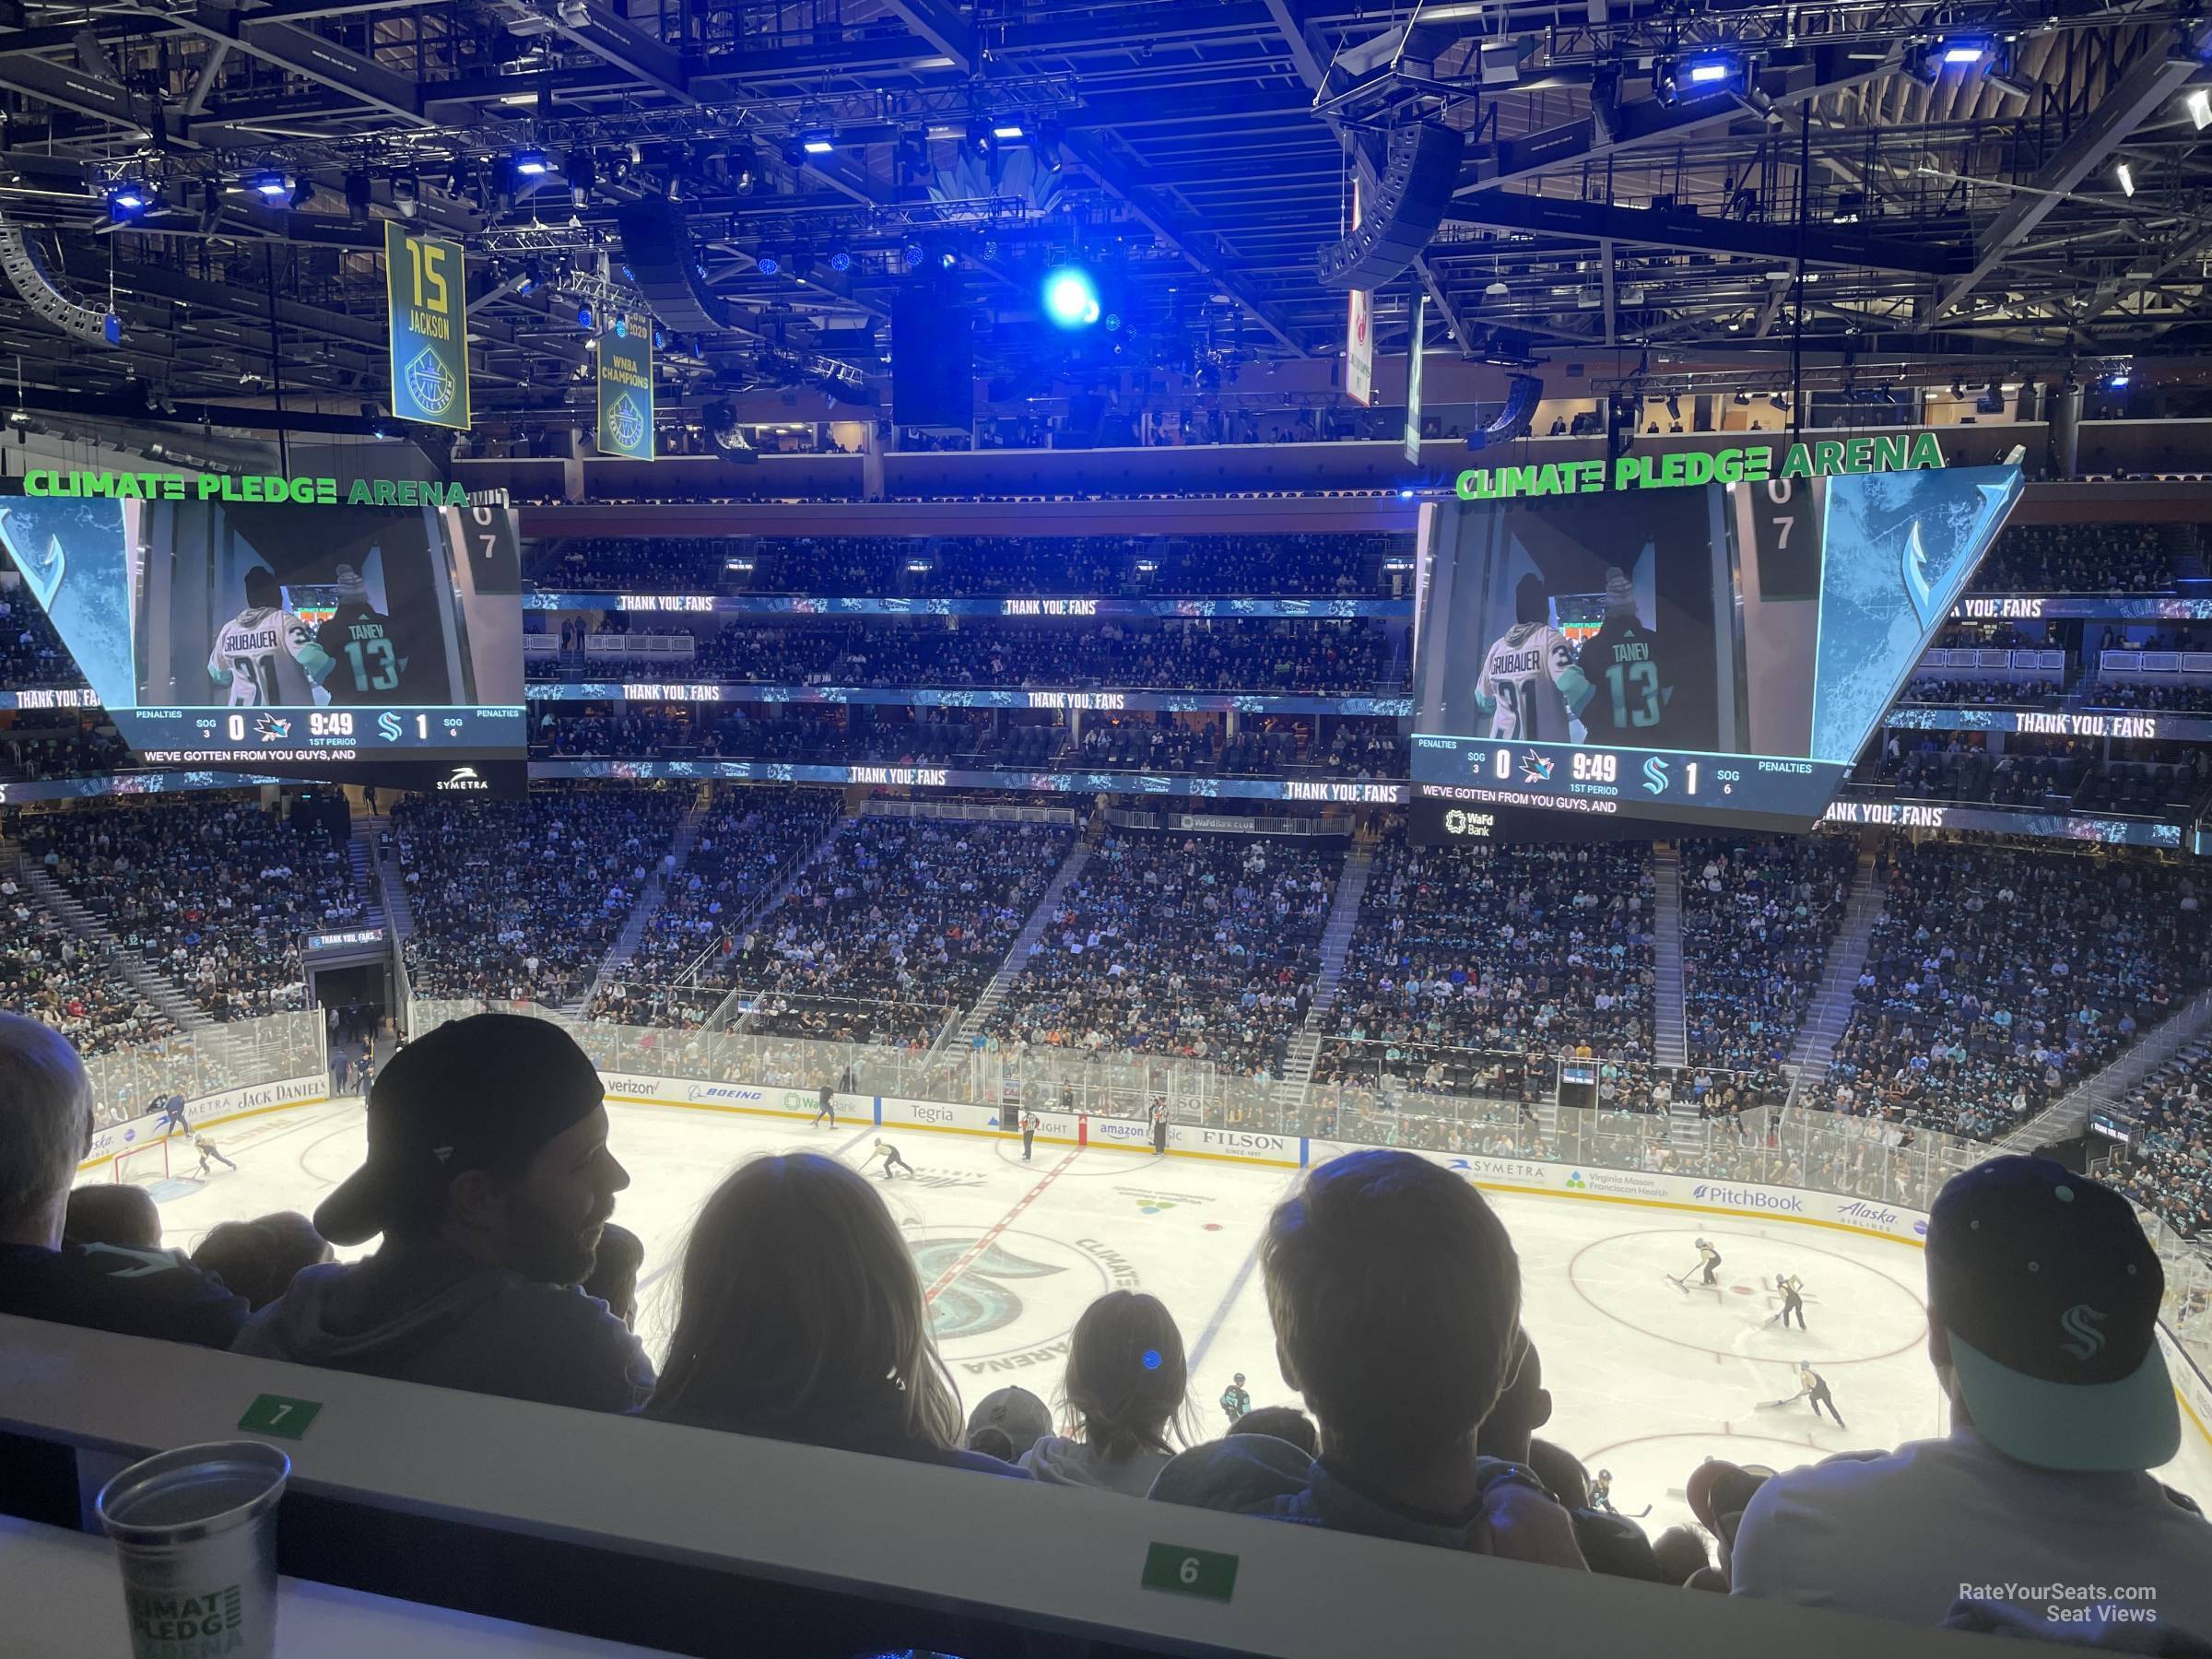 section 126, row bar seat view  for hockey - climate pledge arena